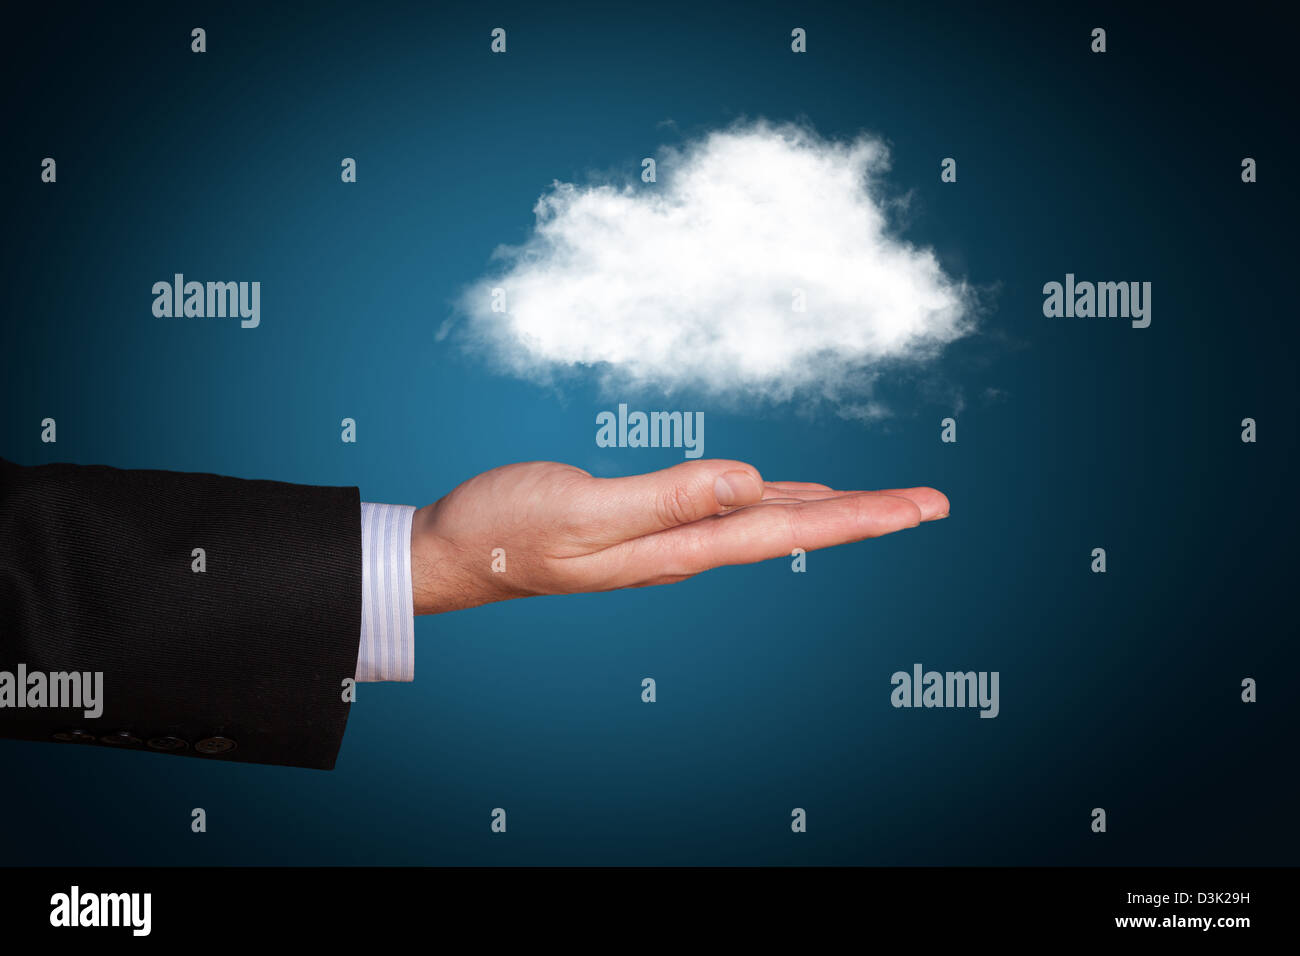 Cloud computing concept with copy space Stock Photo